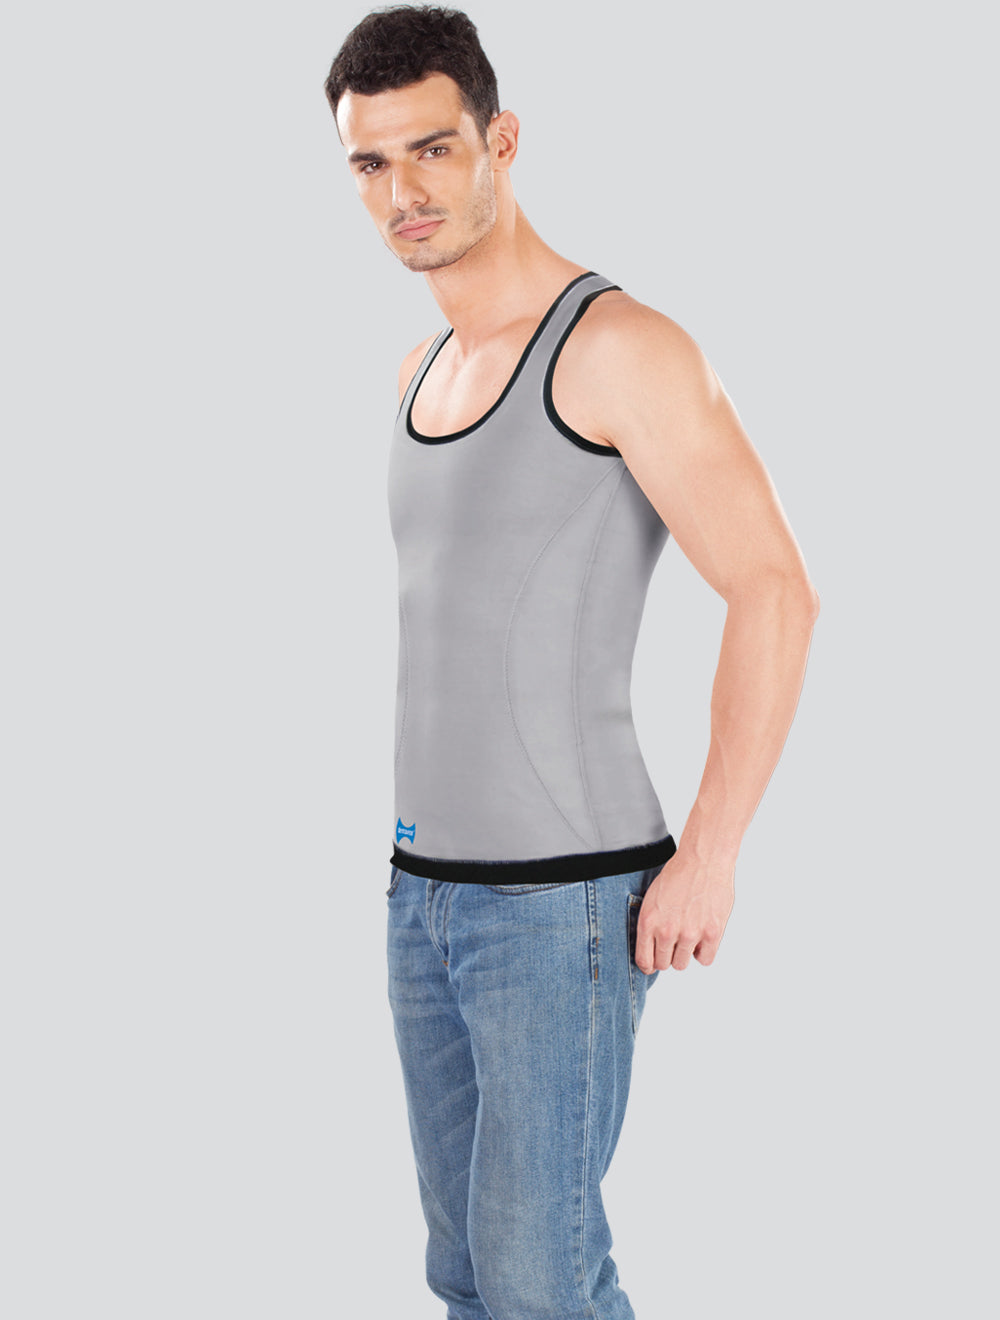 Rediscover Confidence with Dermawear Zenrik-G Men's Shapewear for  Gynecomastia. Experience Unmatched Comfort, Discreet Support, and Total